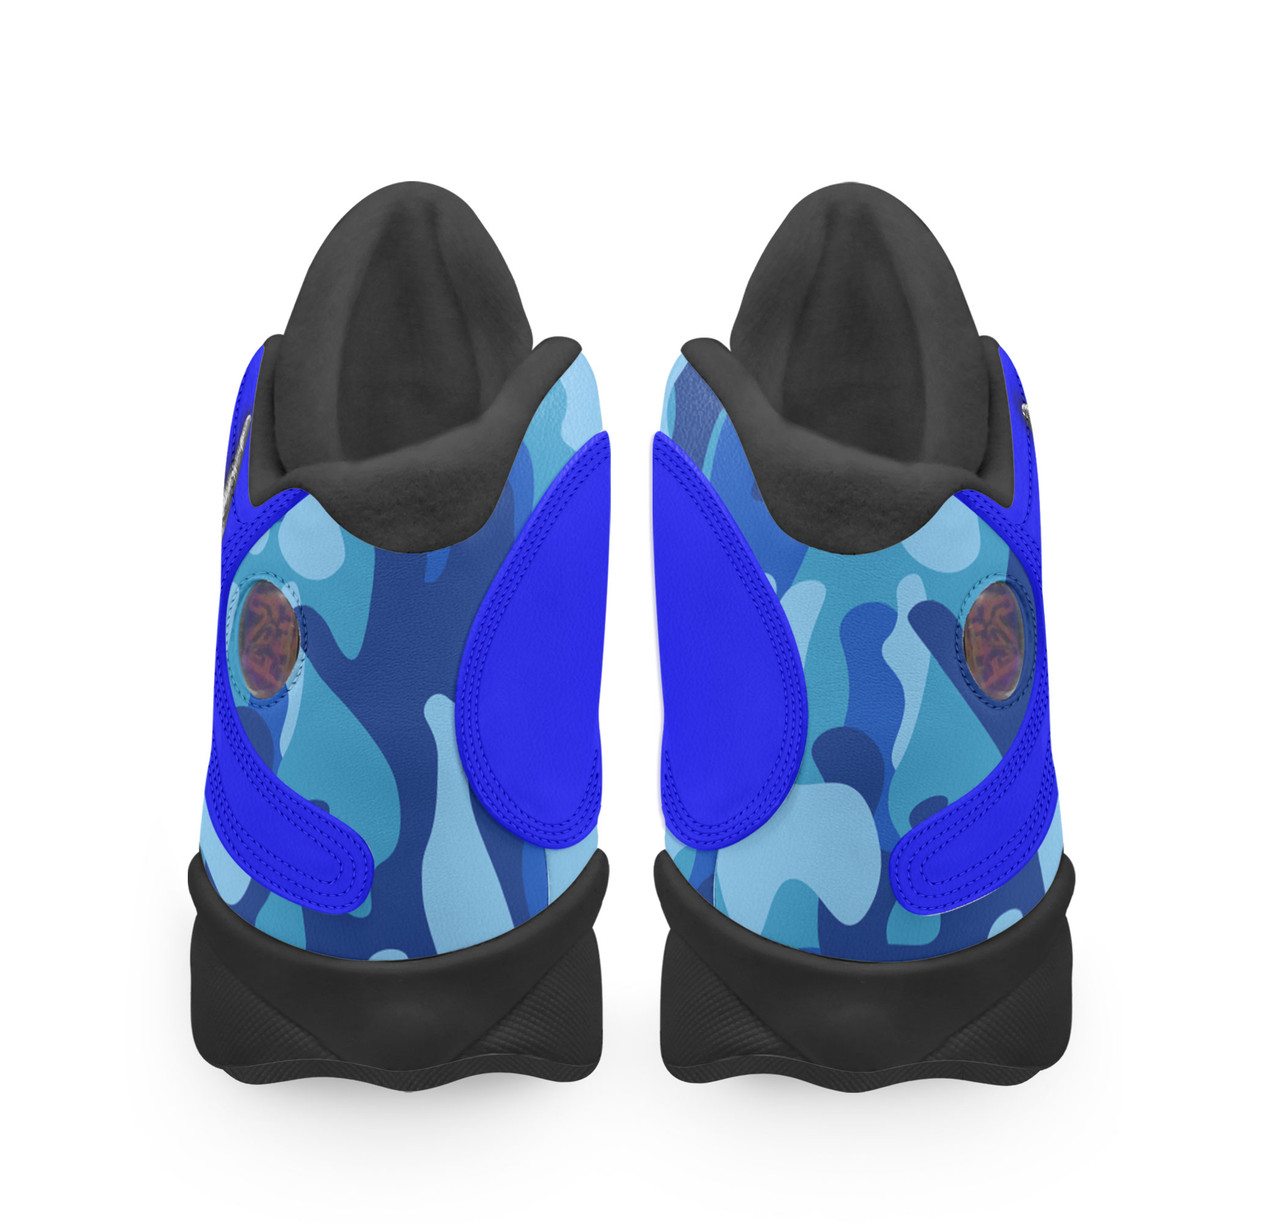 Phi Beta Sigma High Top Basketball Shoes J 13 - Fraternity Hand Gesture Camouflage Patterns High Top Sneakers J 13